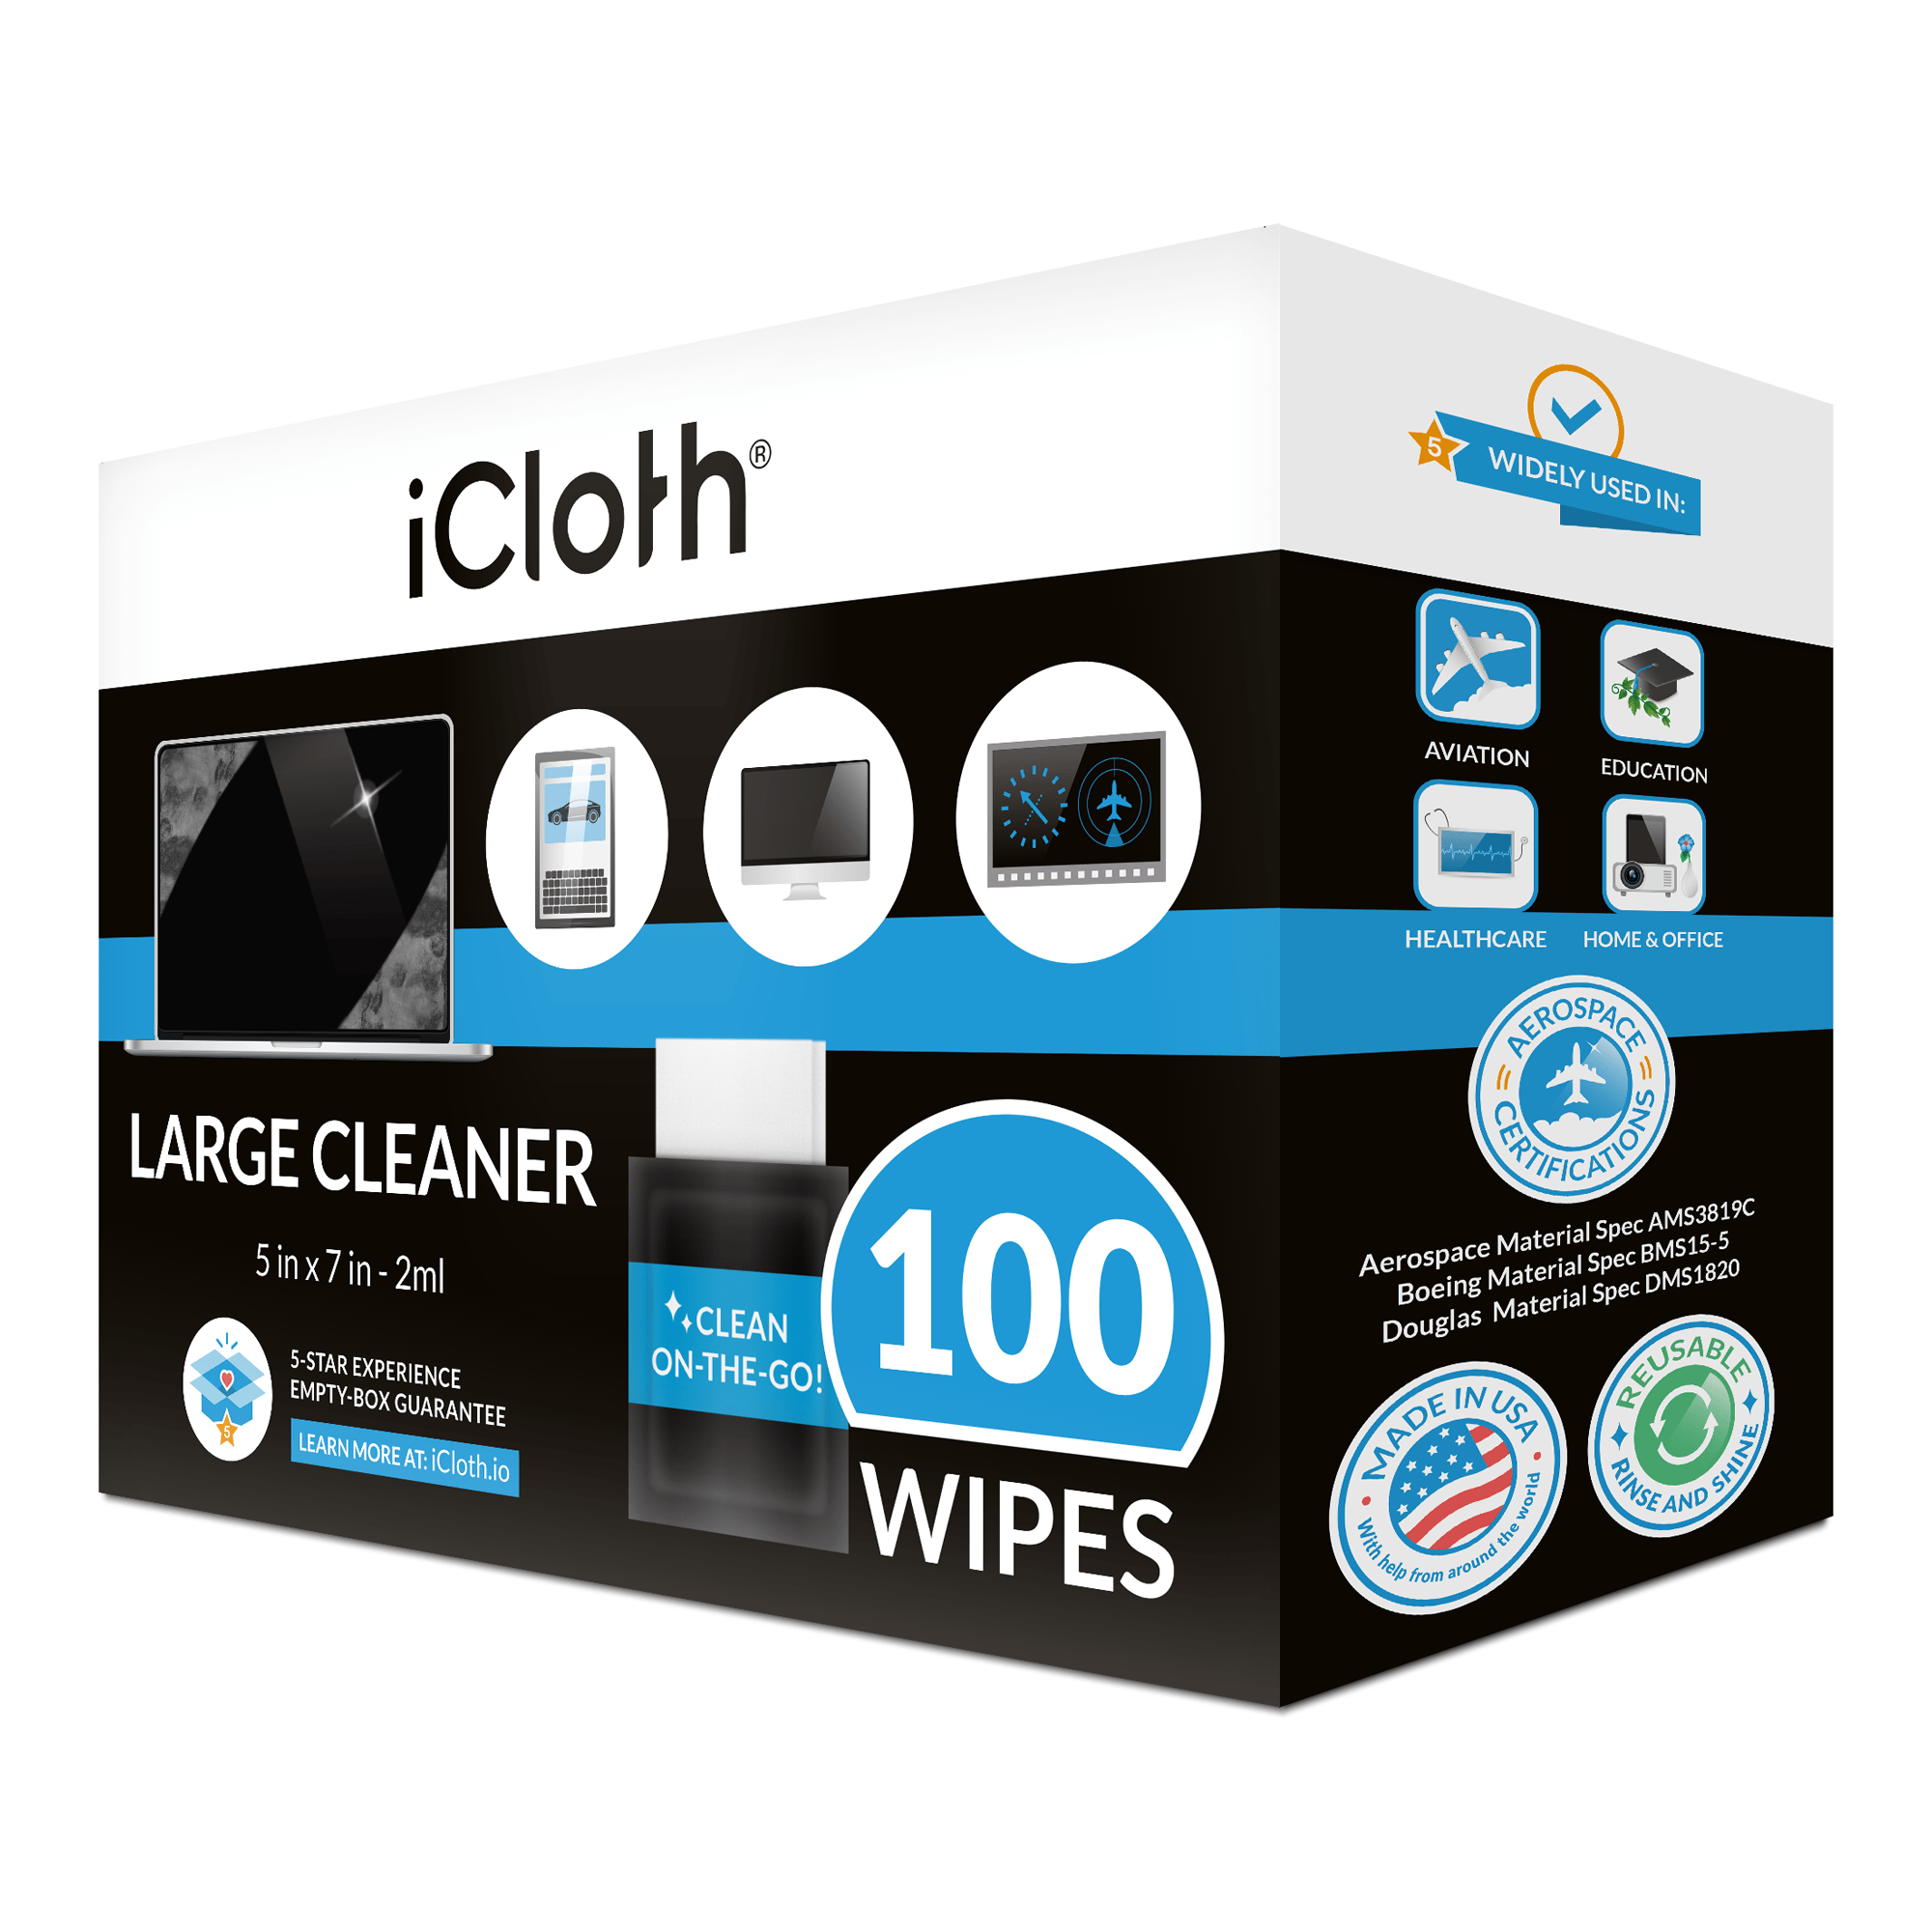 iCloth Box Package with 100 wipes